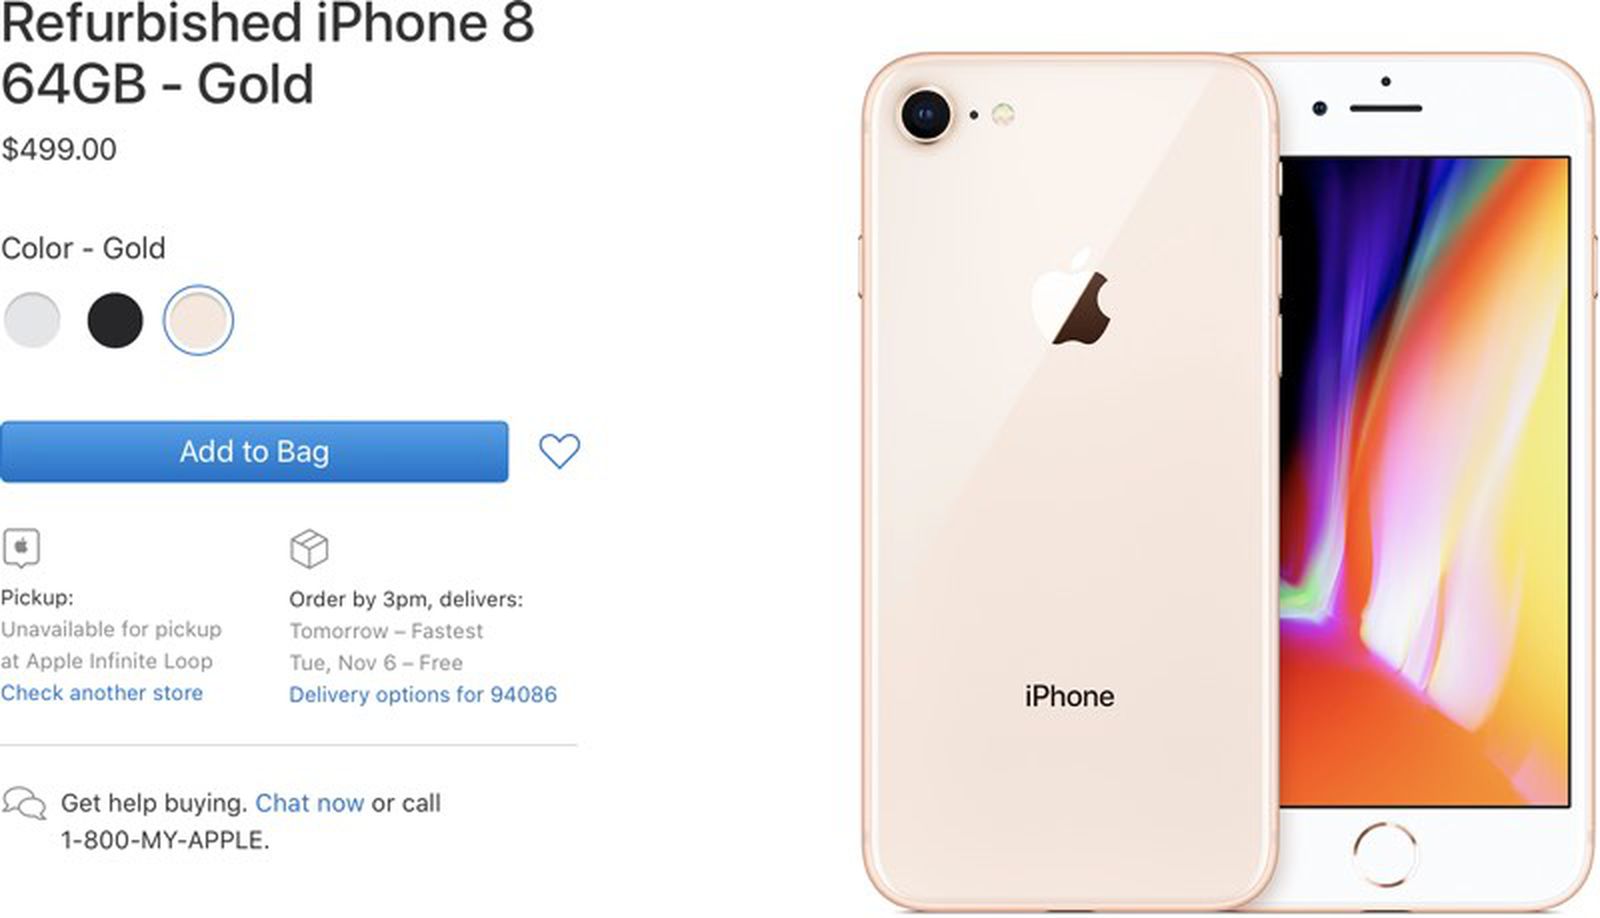 Apple Now Selling Refurbished iPhone 8 and iPhone 8 Plus Models